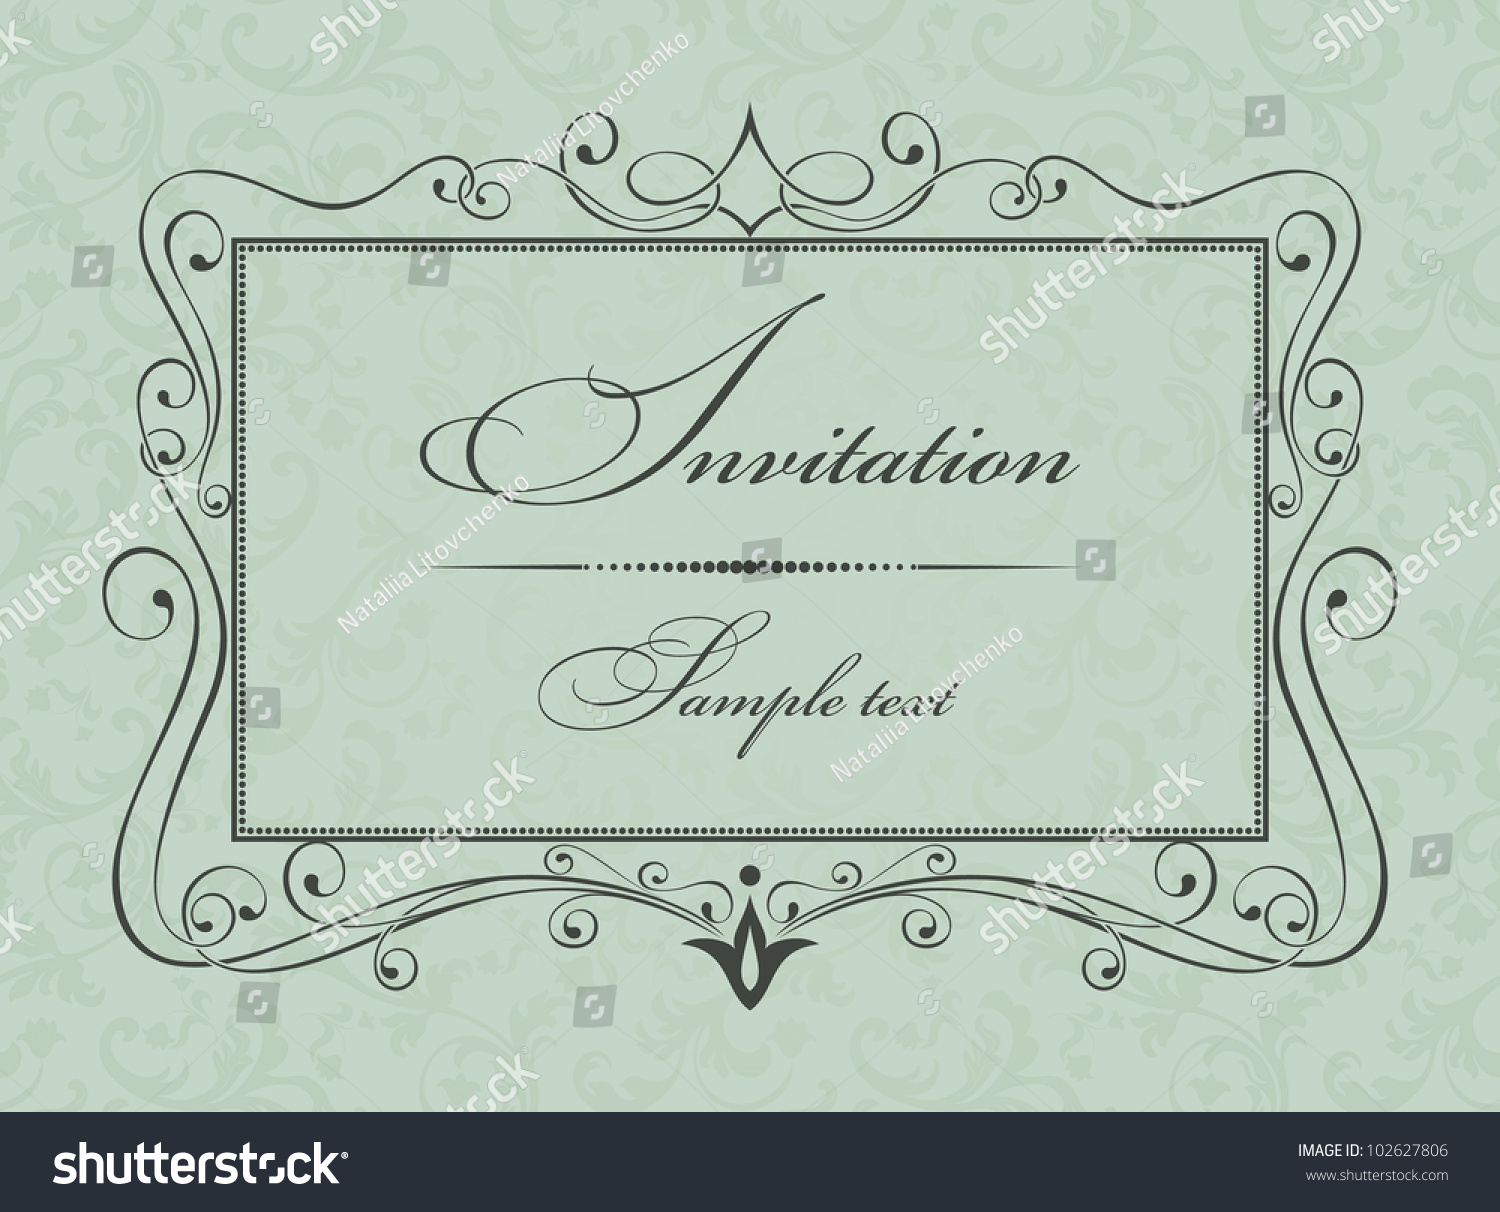 Invitation Cards In An Old-Style Green Stock Vector Illustration